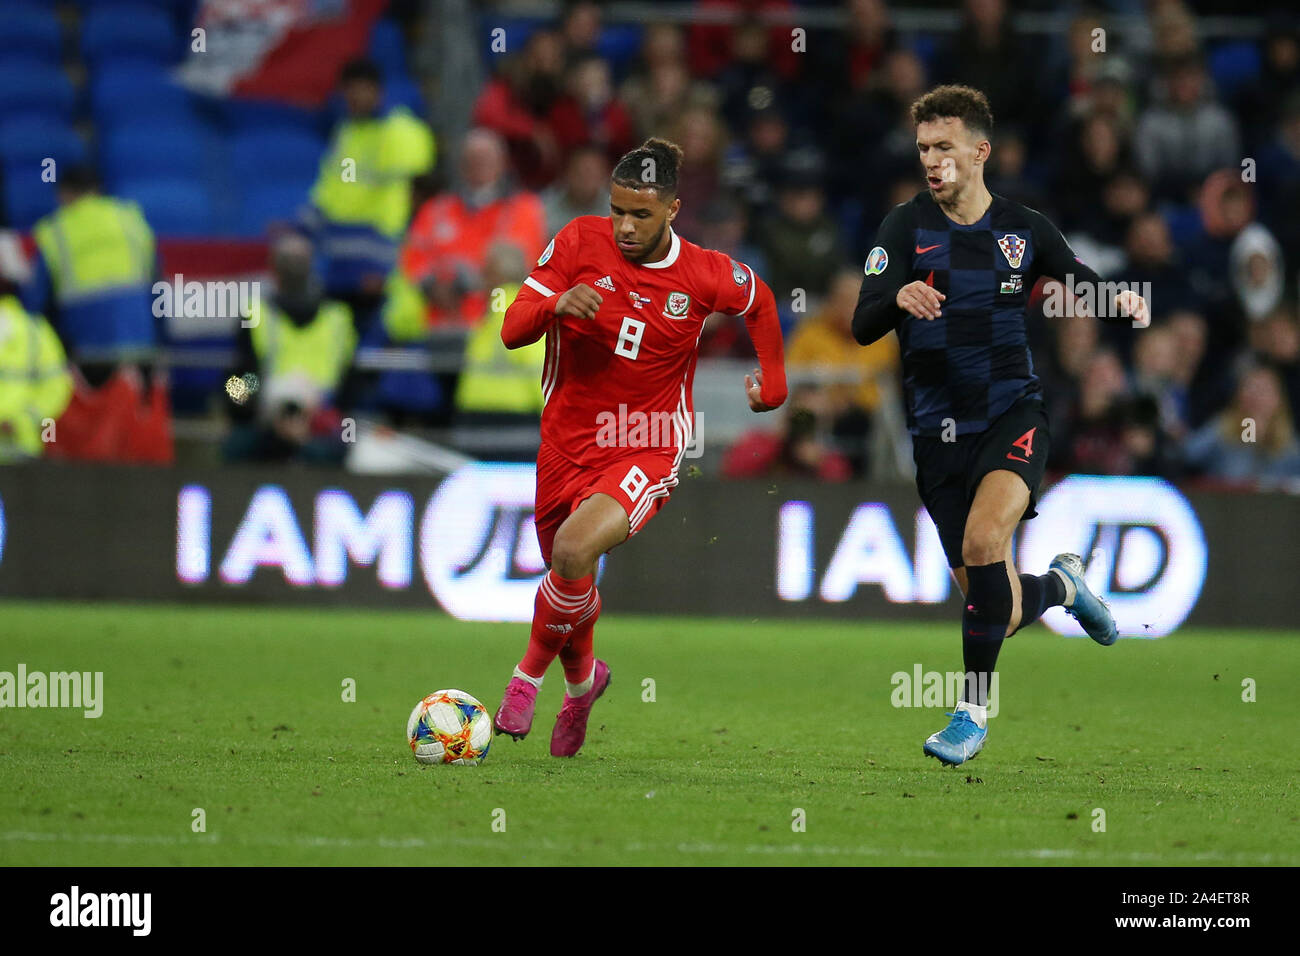 Cardiff, UK. 13th Oct, 2019. Tyler Roberts of Wales breaks away from Ivan Perisic of Croatia.UEFA Euro 2020 qualifier match, Wales v Croatia at the Cardiff city Stadium in Cardiff, South Wales on Sunday 13th October 2019. pic by Andrew Orchard /Andrew Orchard sports photography/Alamy live News EDITORIAL USE ONLY Credit: Andrew Orchard sports photography/Alamy Live News Stock Photo